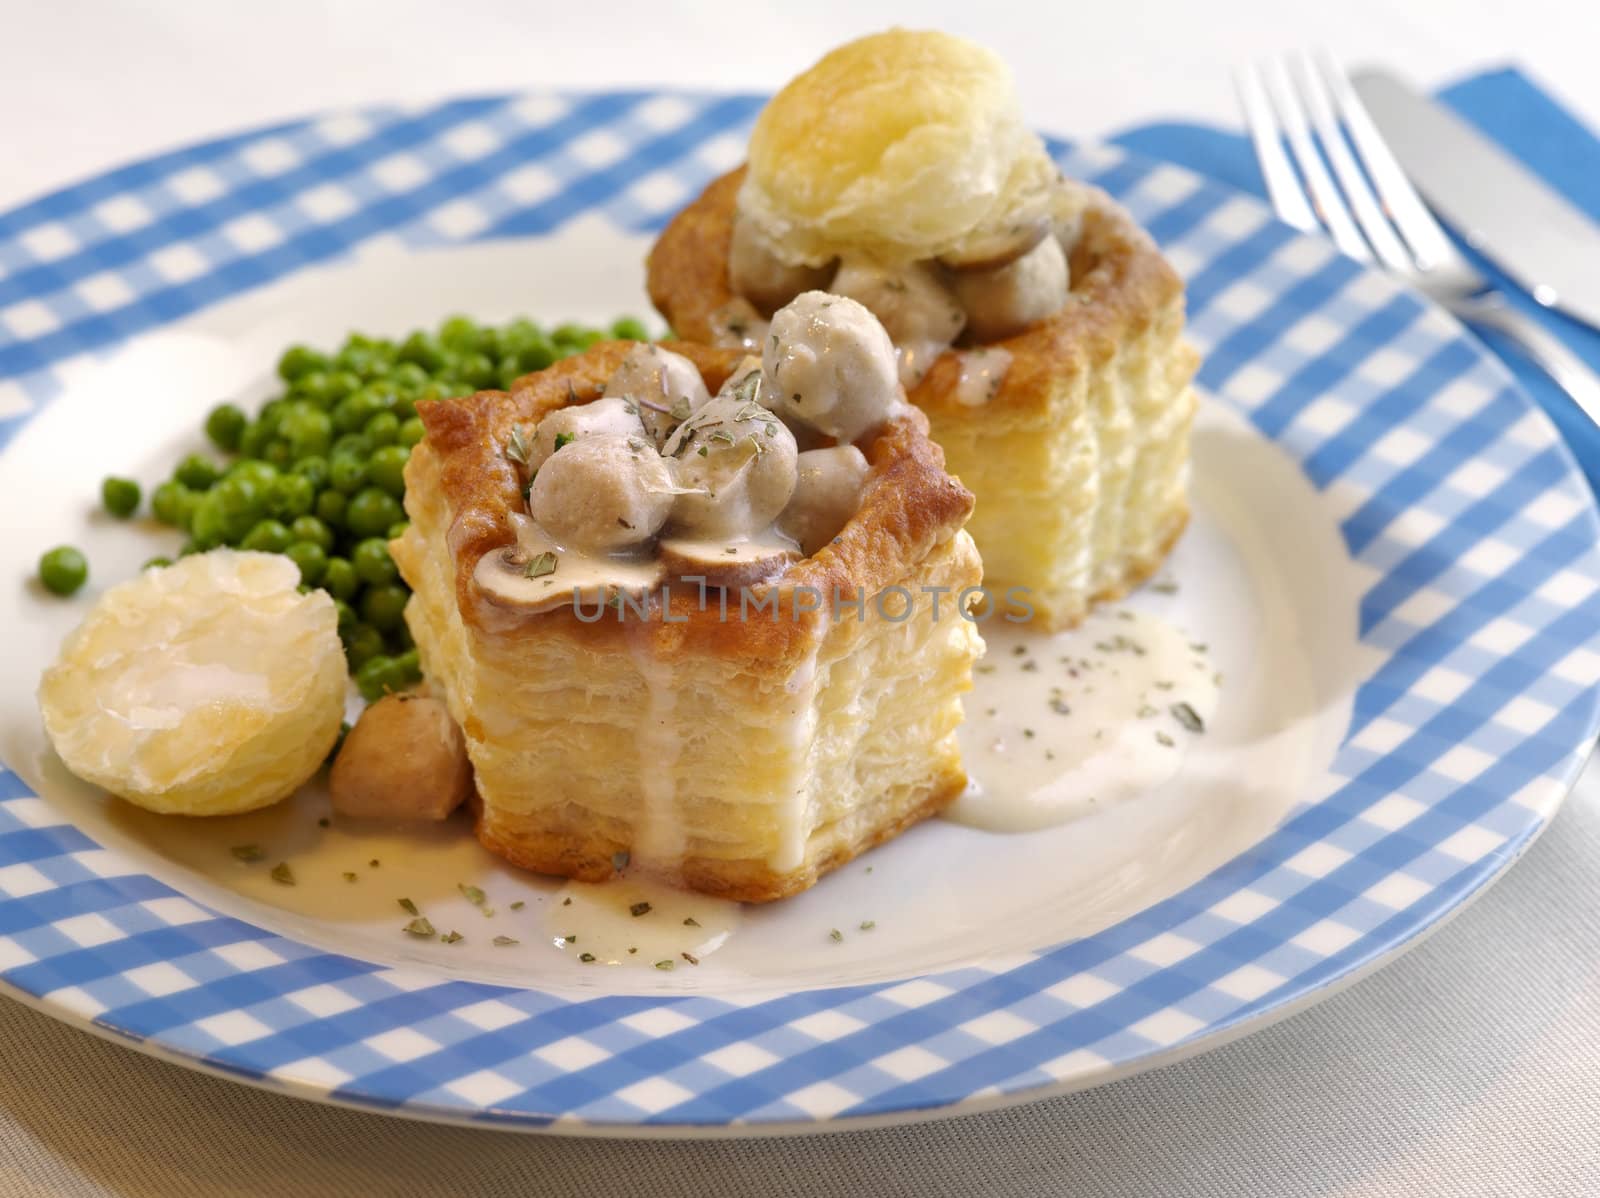 Photo of Pastetli, a traditional Swiss vol-au-vent meal made with a white wine sauce and a mushroom and meat filling.